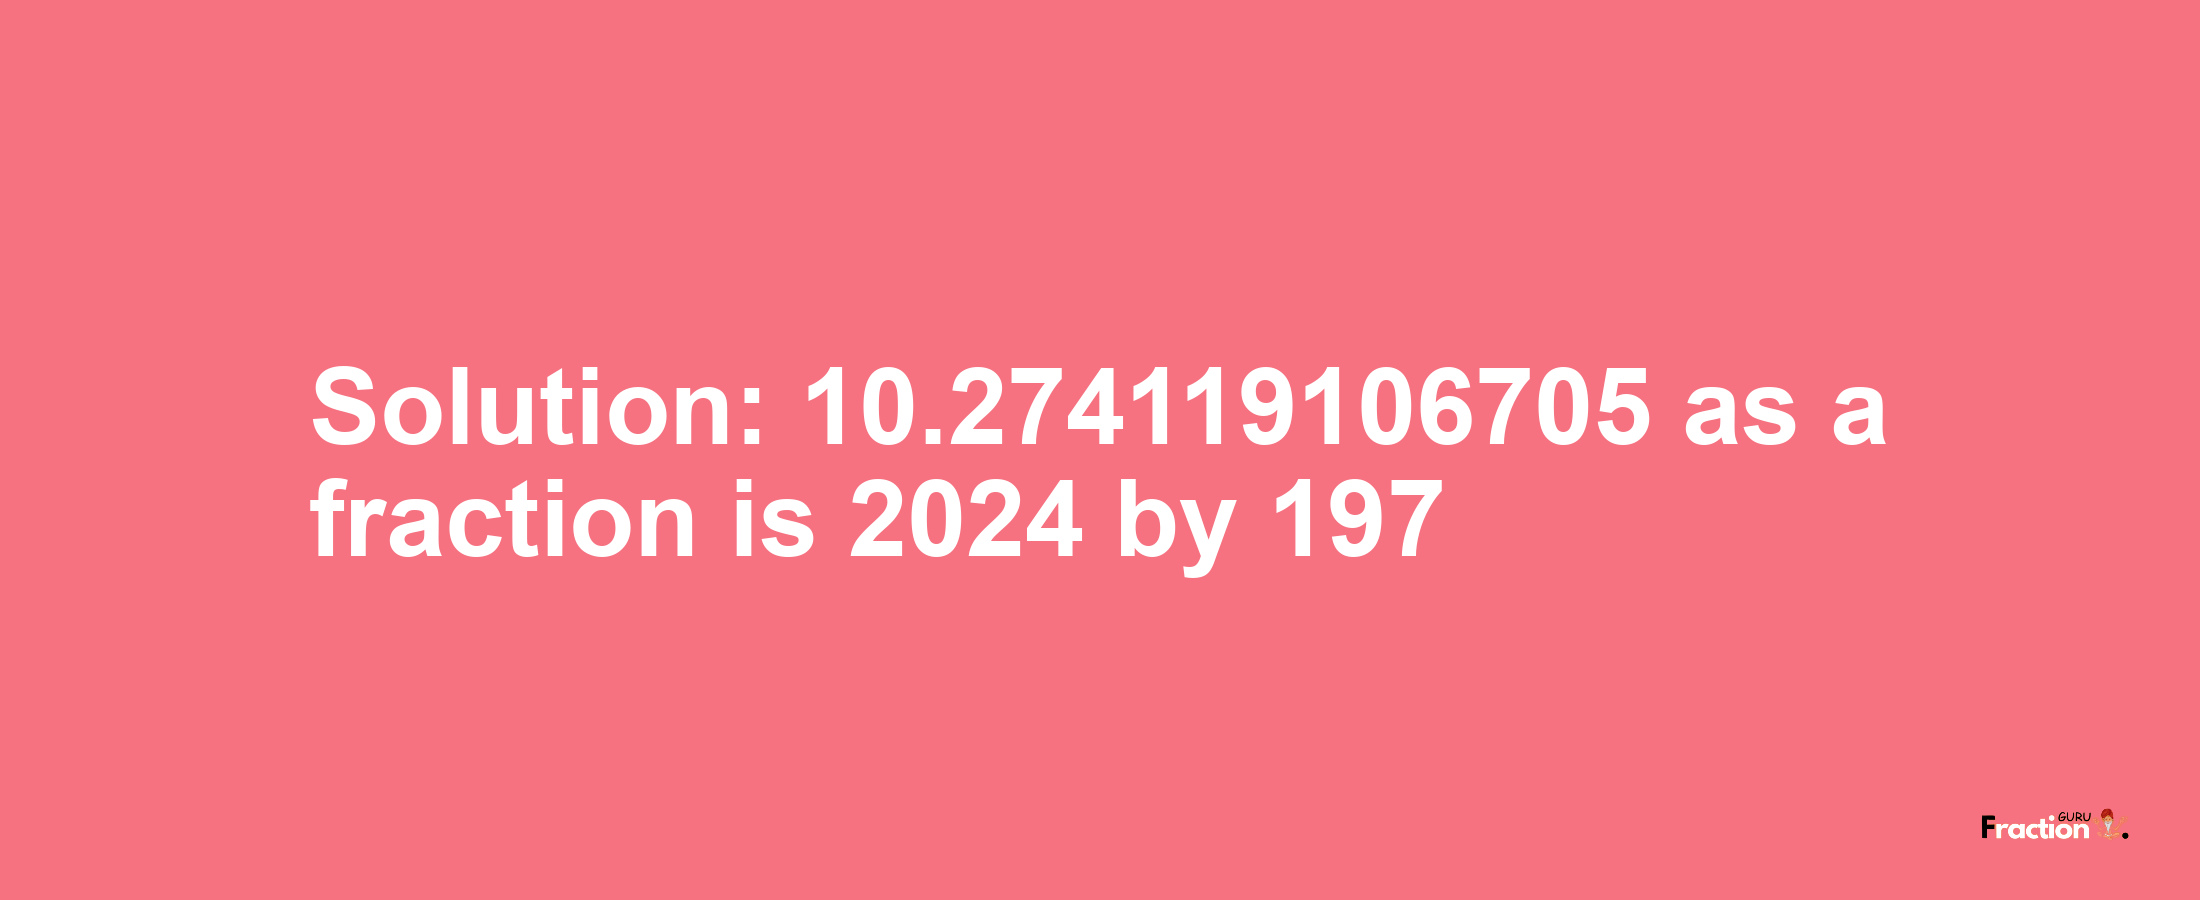 Solution:10.274119106705 as a fraction is 2024/197